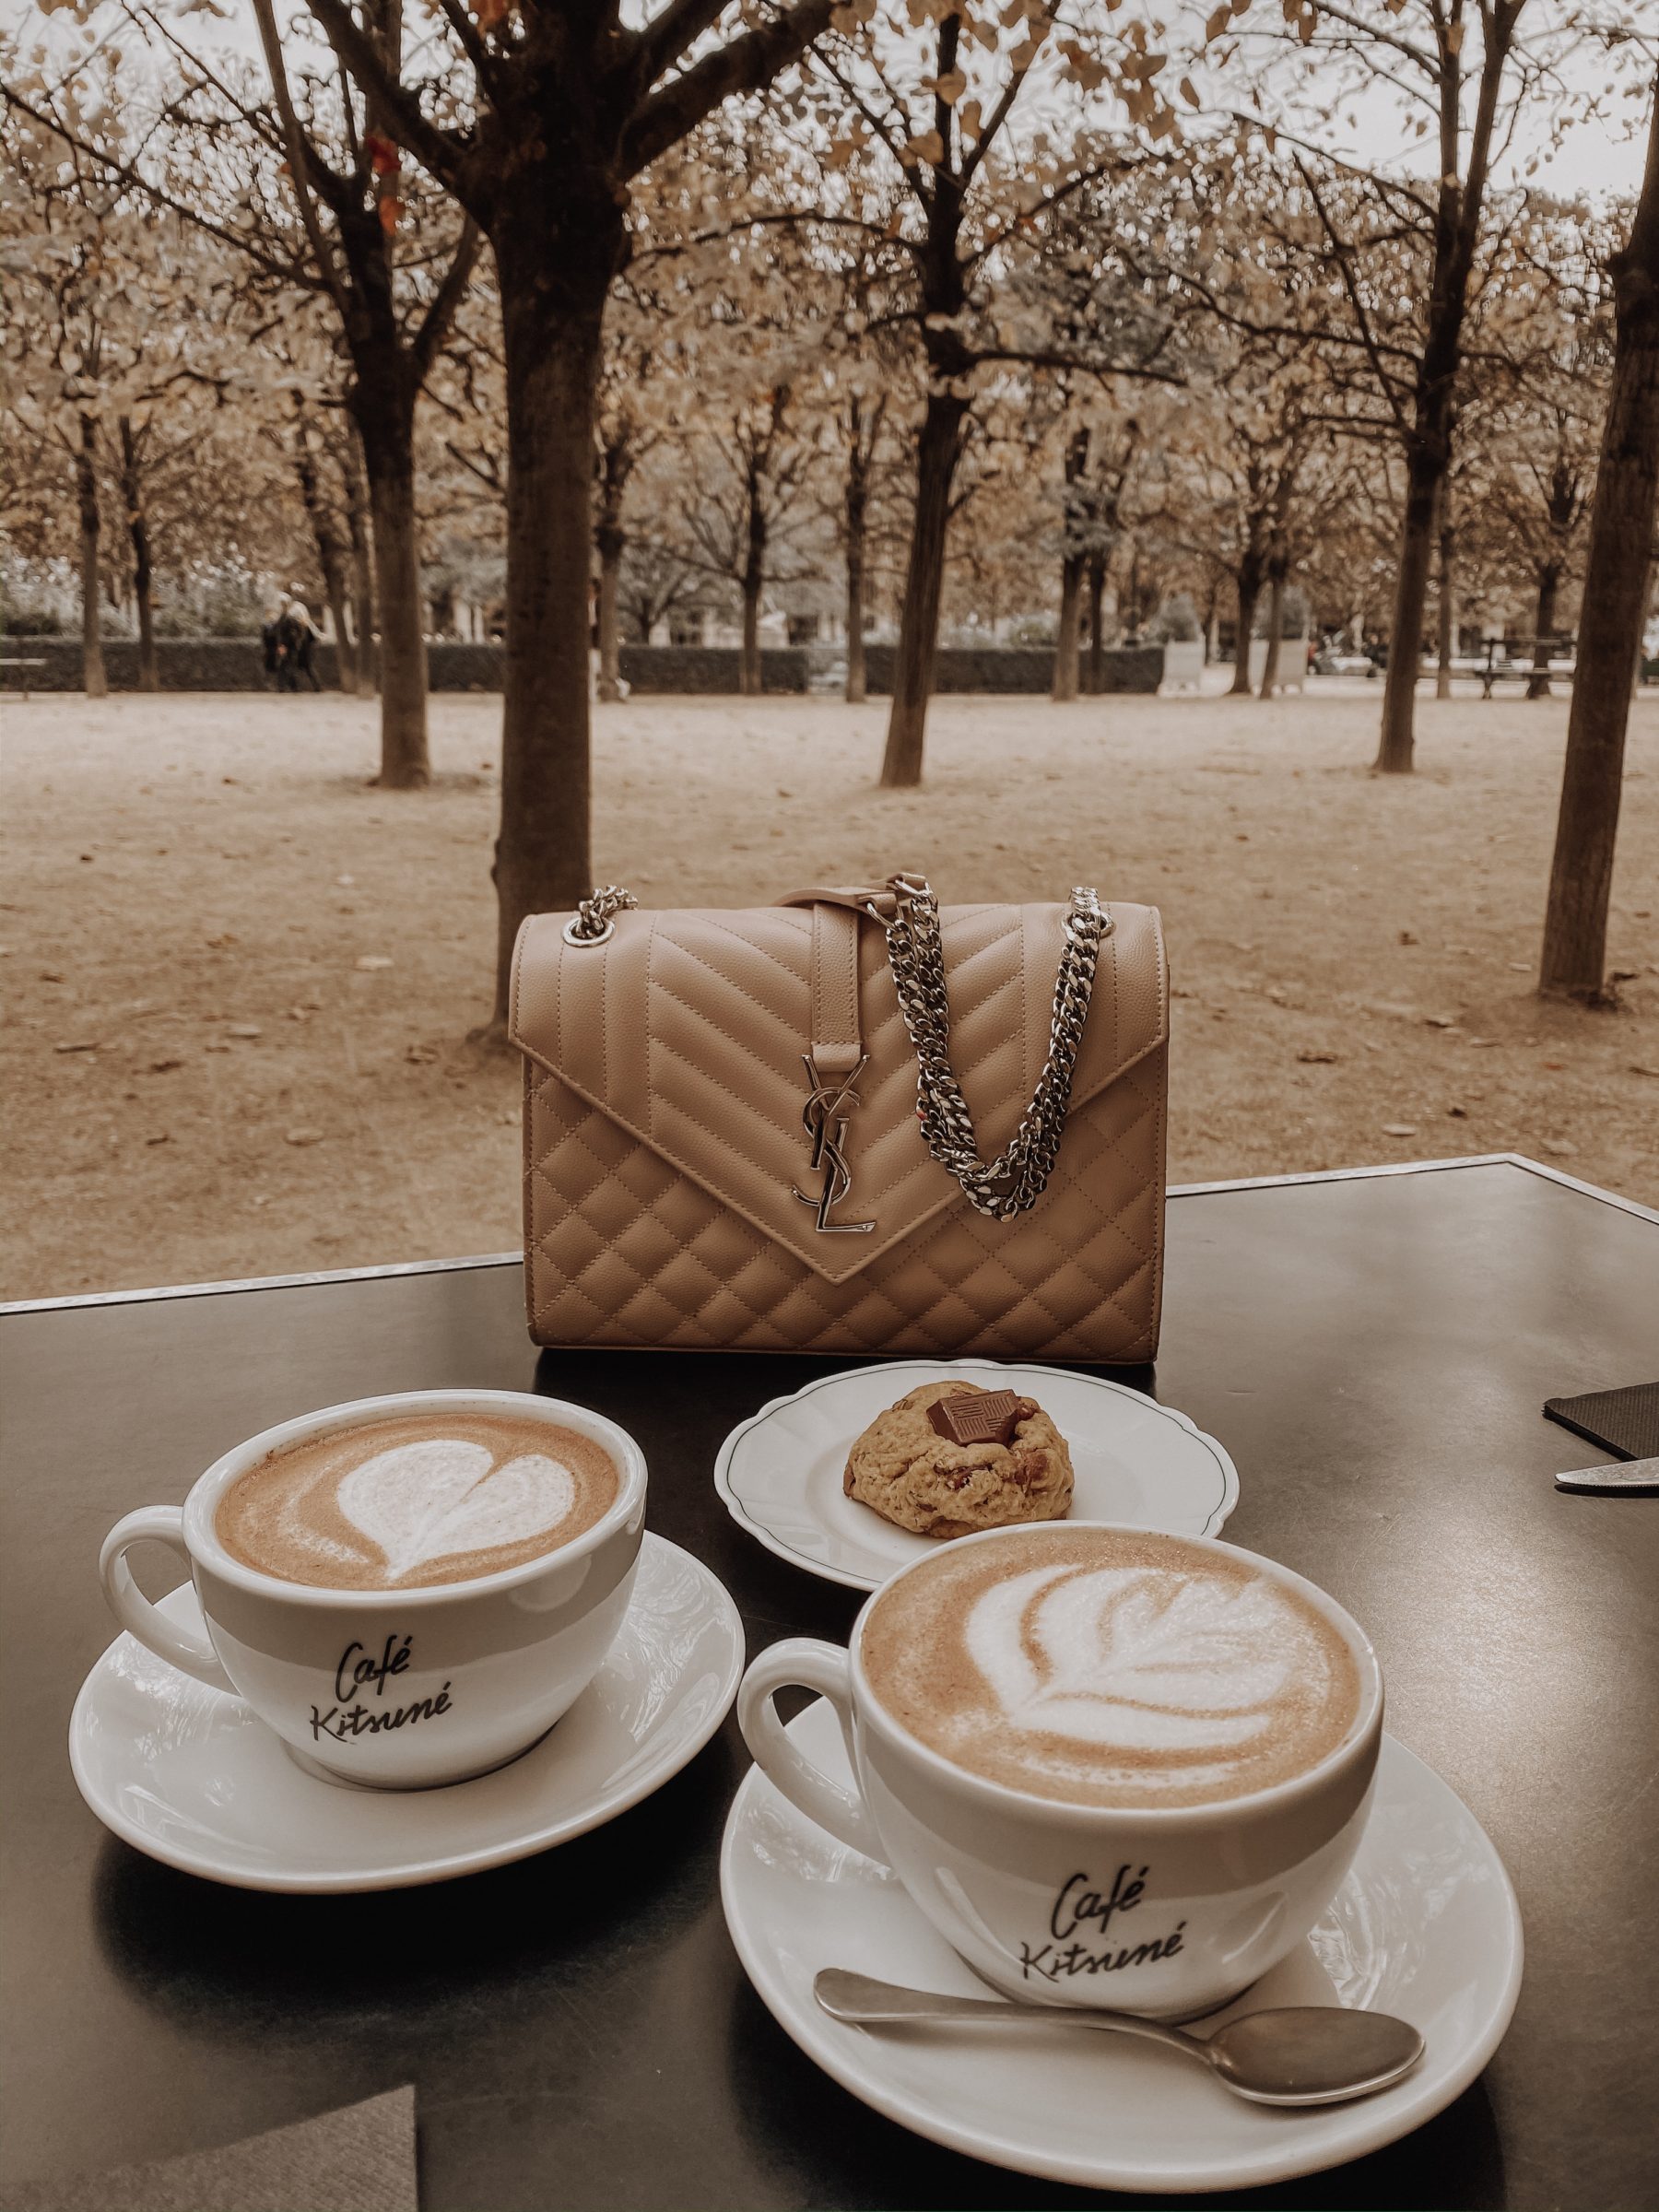 Cafes To Visit in Paris | Paris Cafes | Cafe Kitsune | Blondie in the City by Hayley Larue